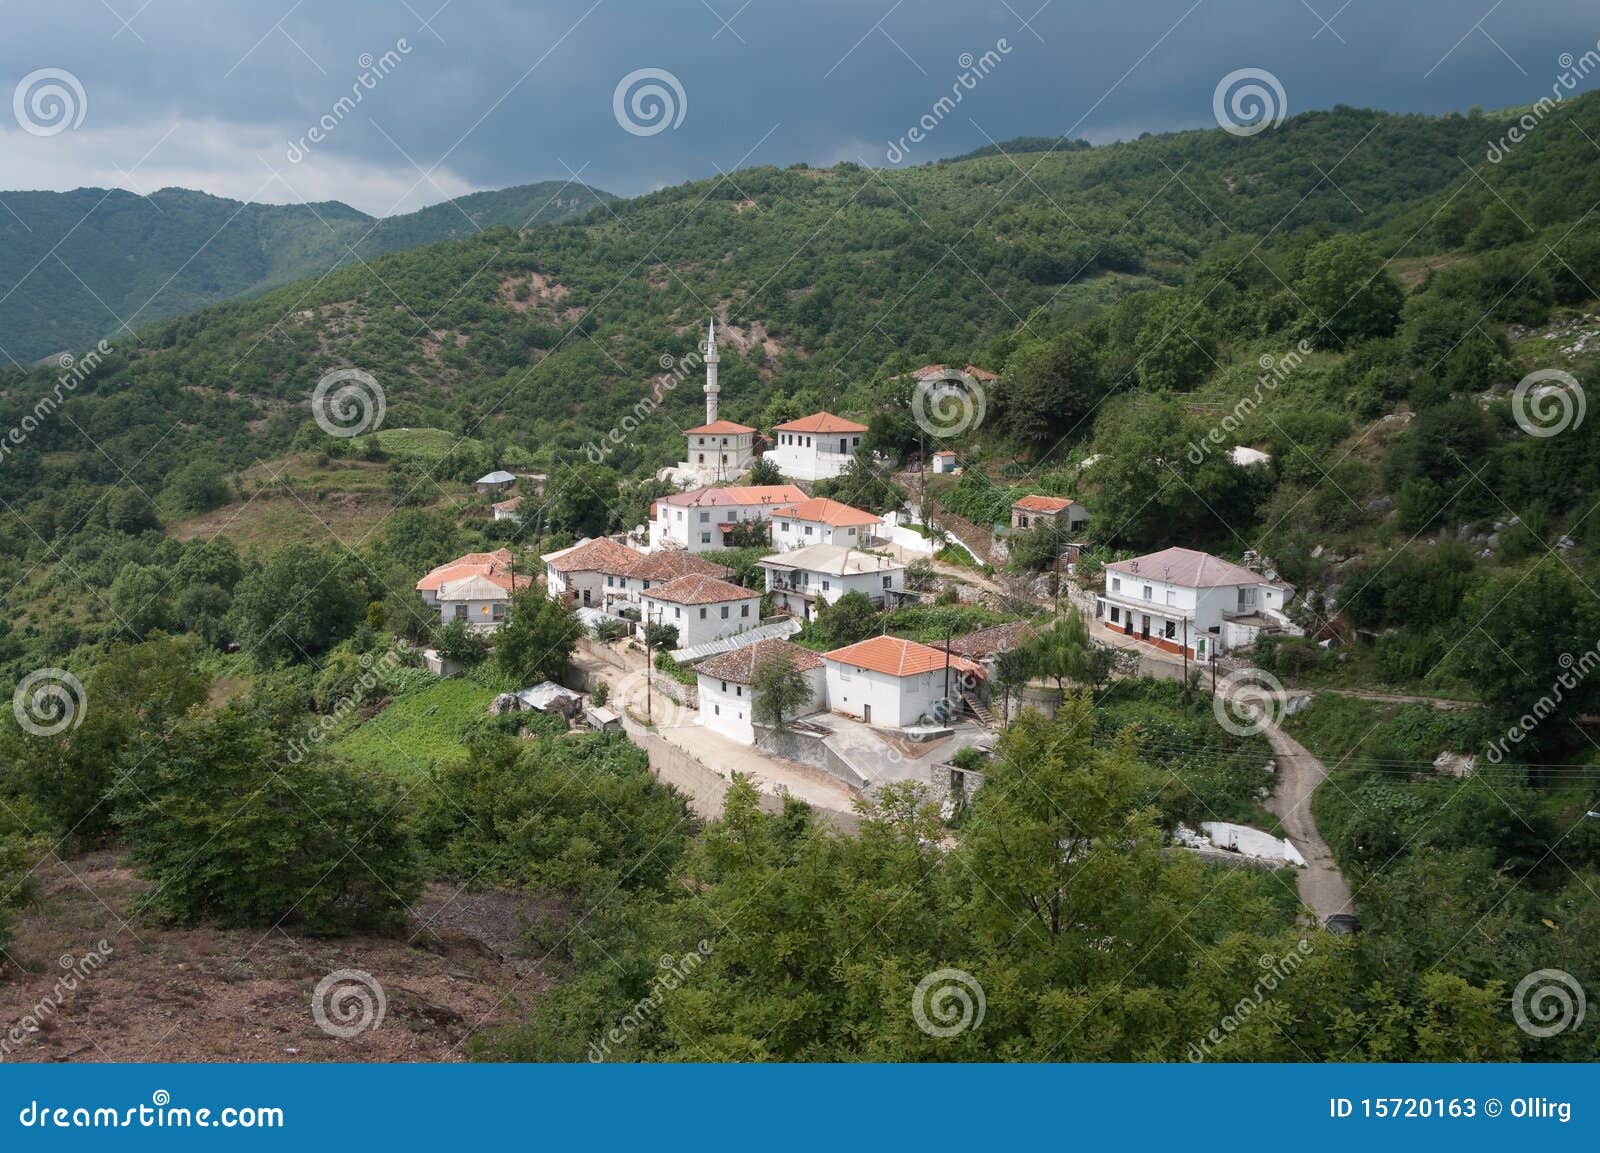 white village and mosque in the thrace greece